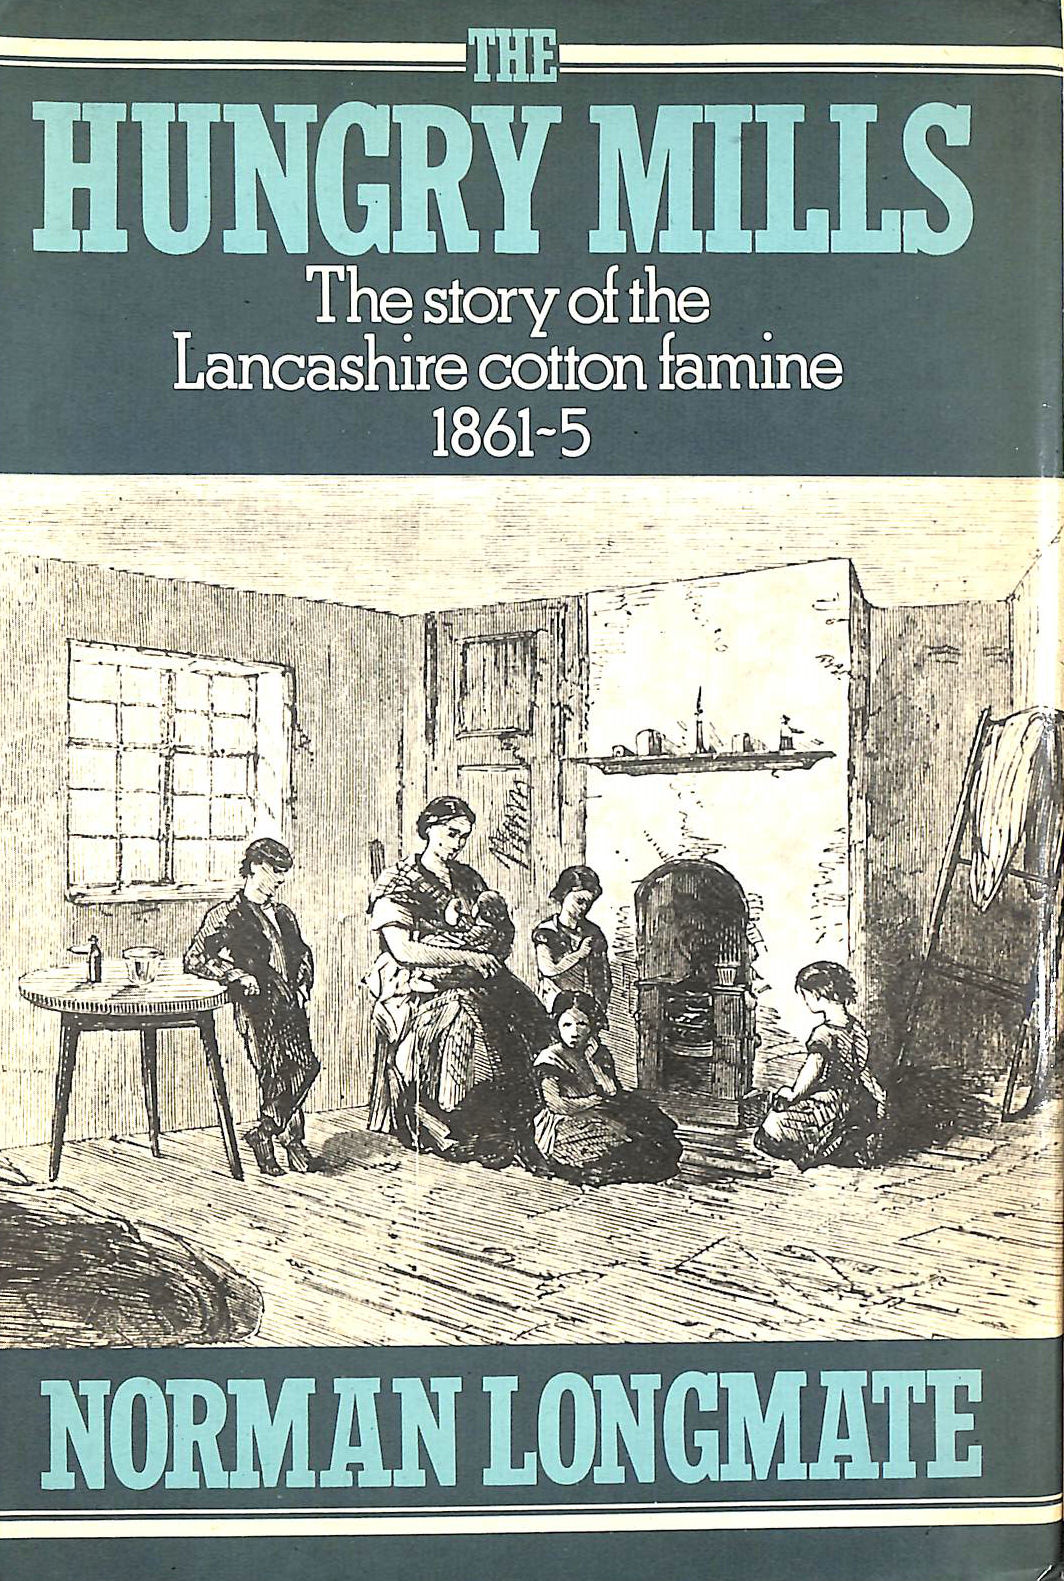 LONGMATE, NORMAN - The Hungry Mills. The story of the Lancashire cotton famine 1862-5